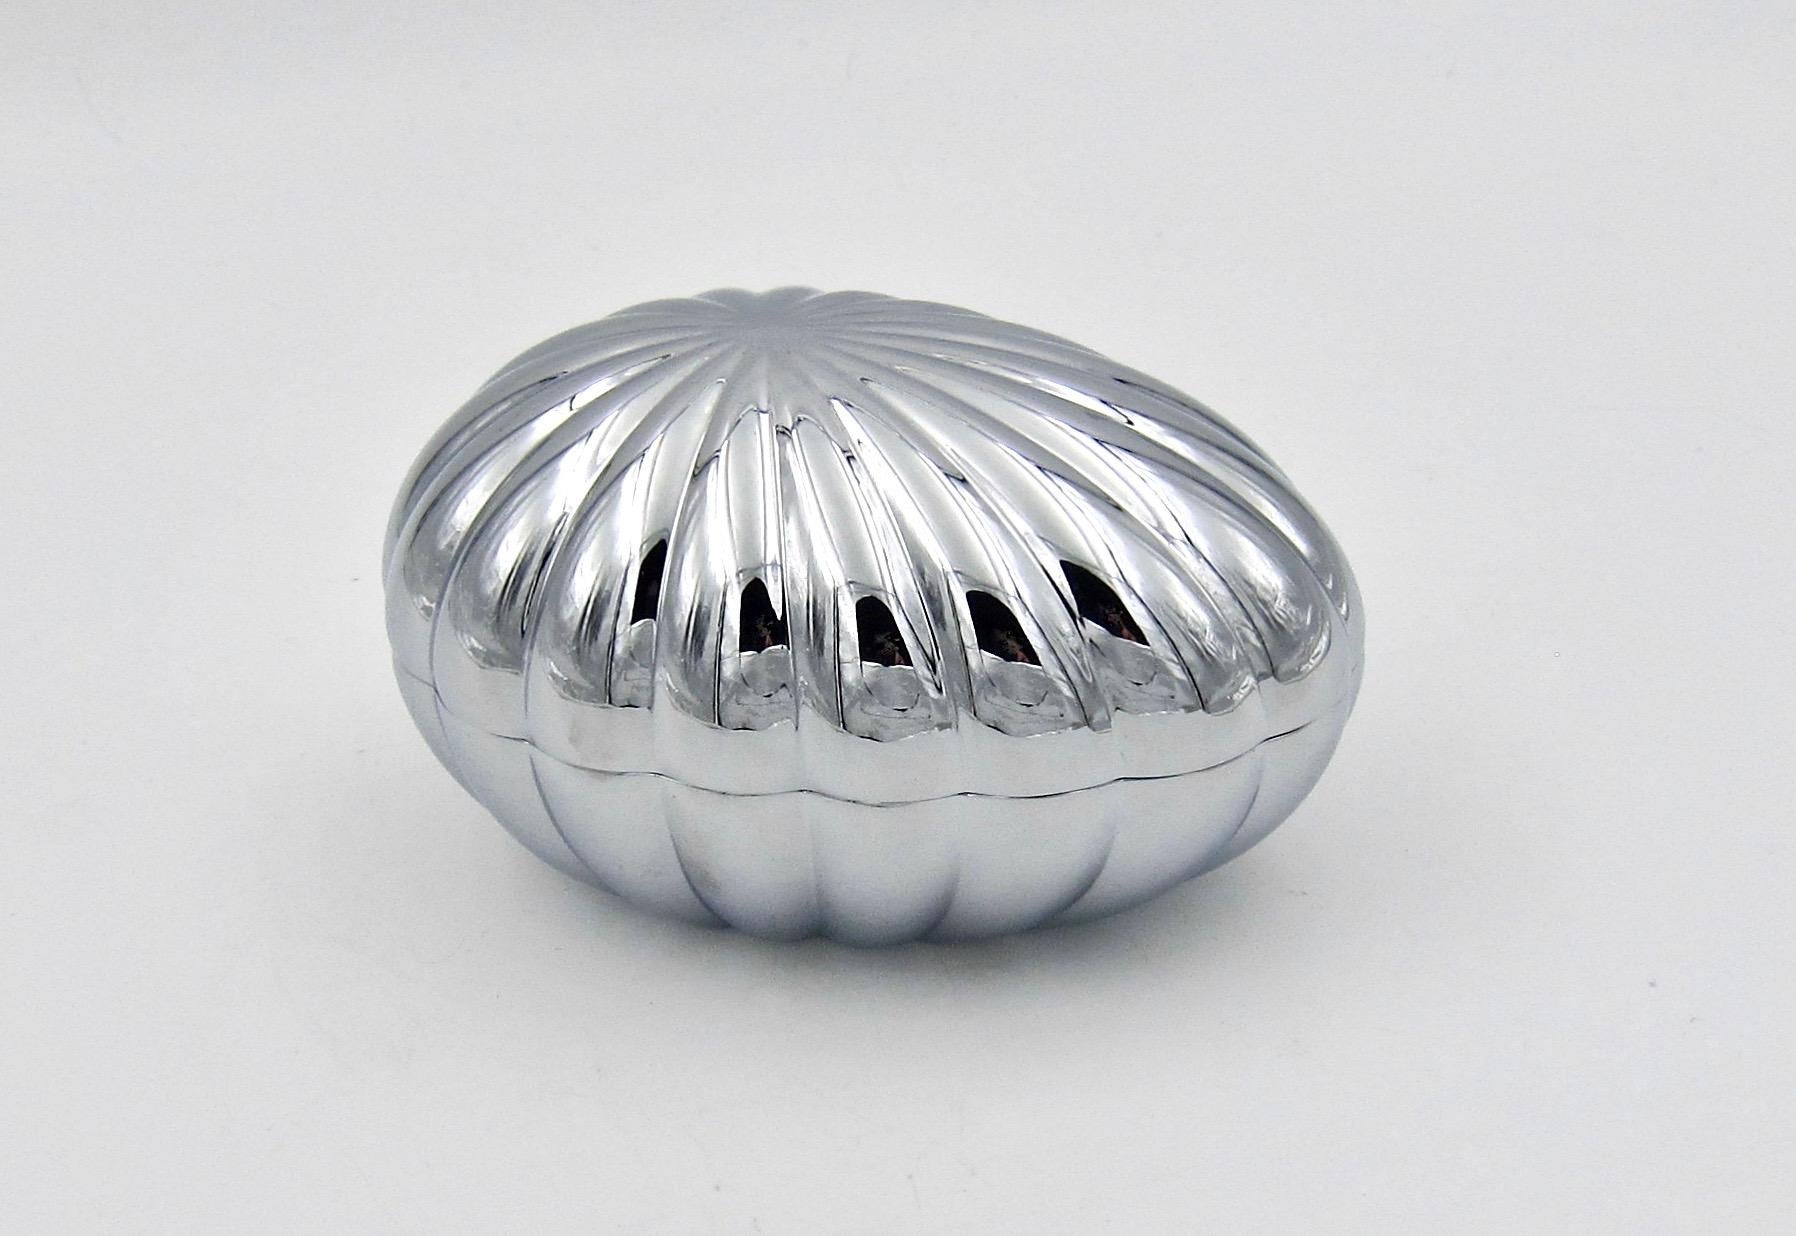 A scalloped and highly polished chromium-plated bonbonniere box shaped like an egg, designed by Philip Bro Ludvigsen for Georg Jensen. The sculptural bonbonniere was designed to hold candies but is an ideal size and shape for jewelry, keys, and